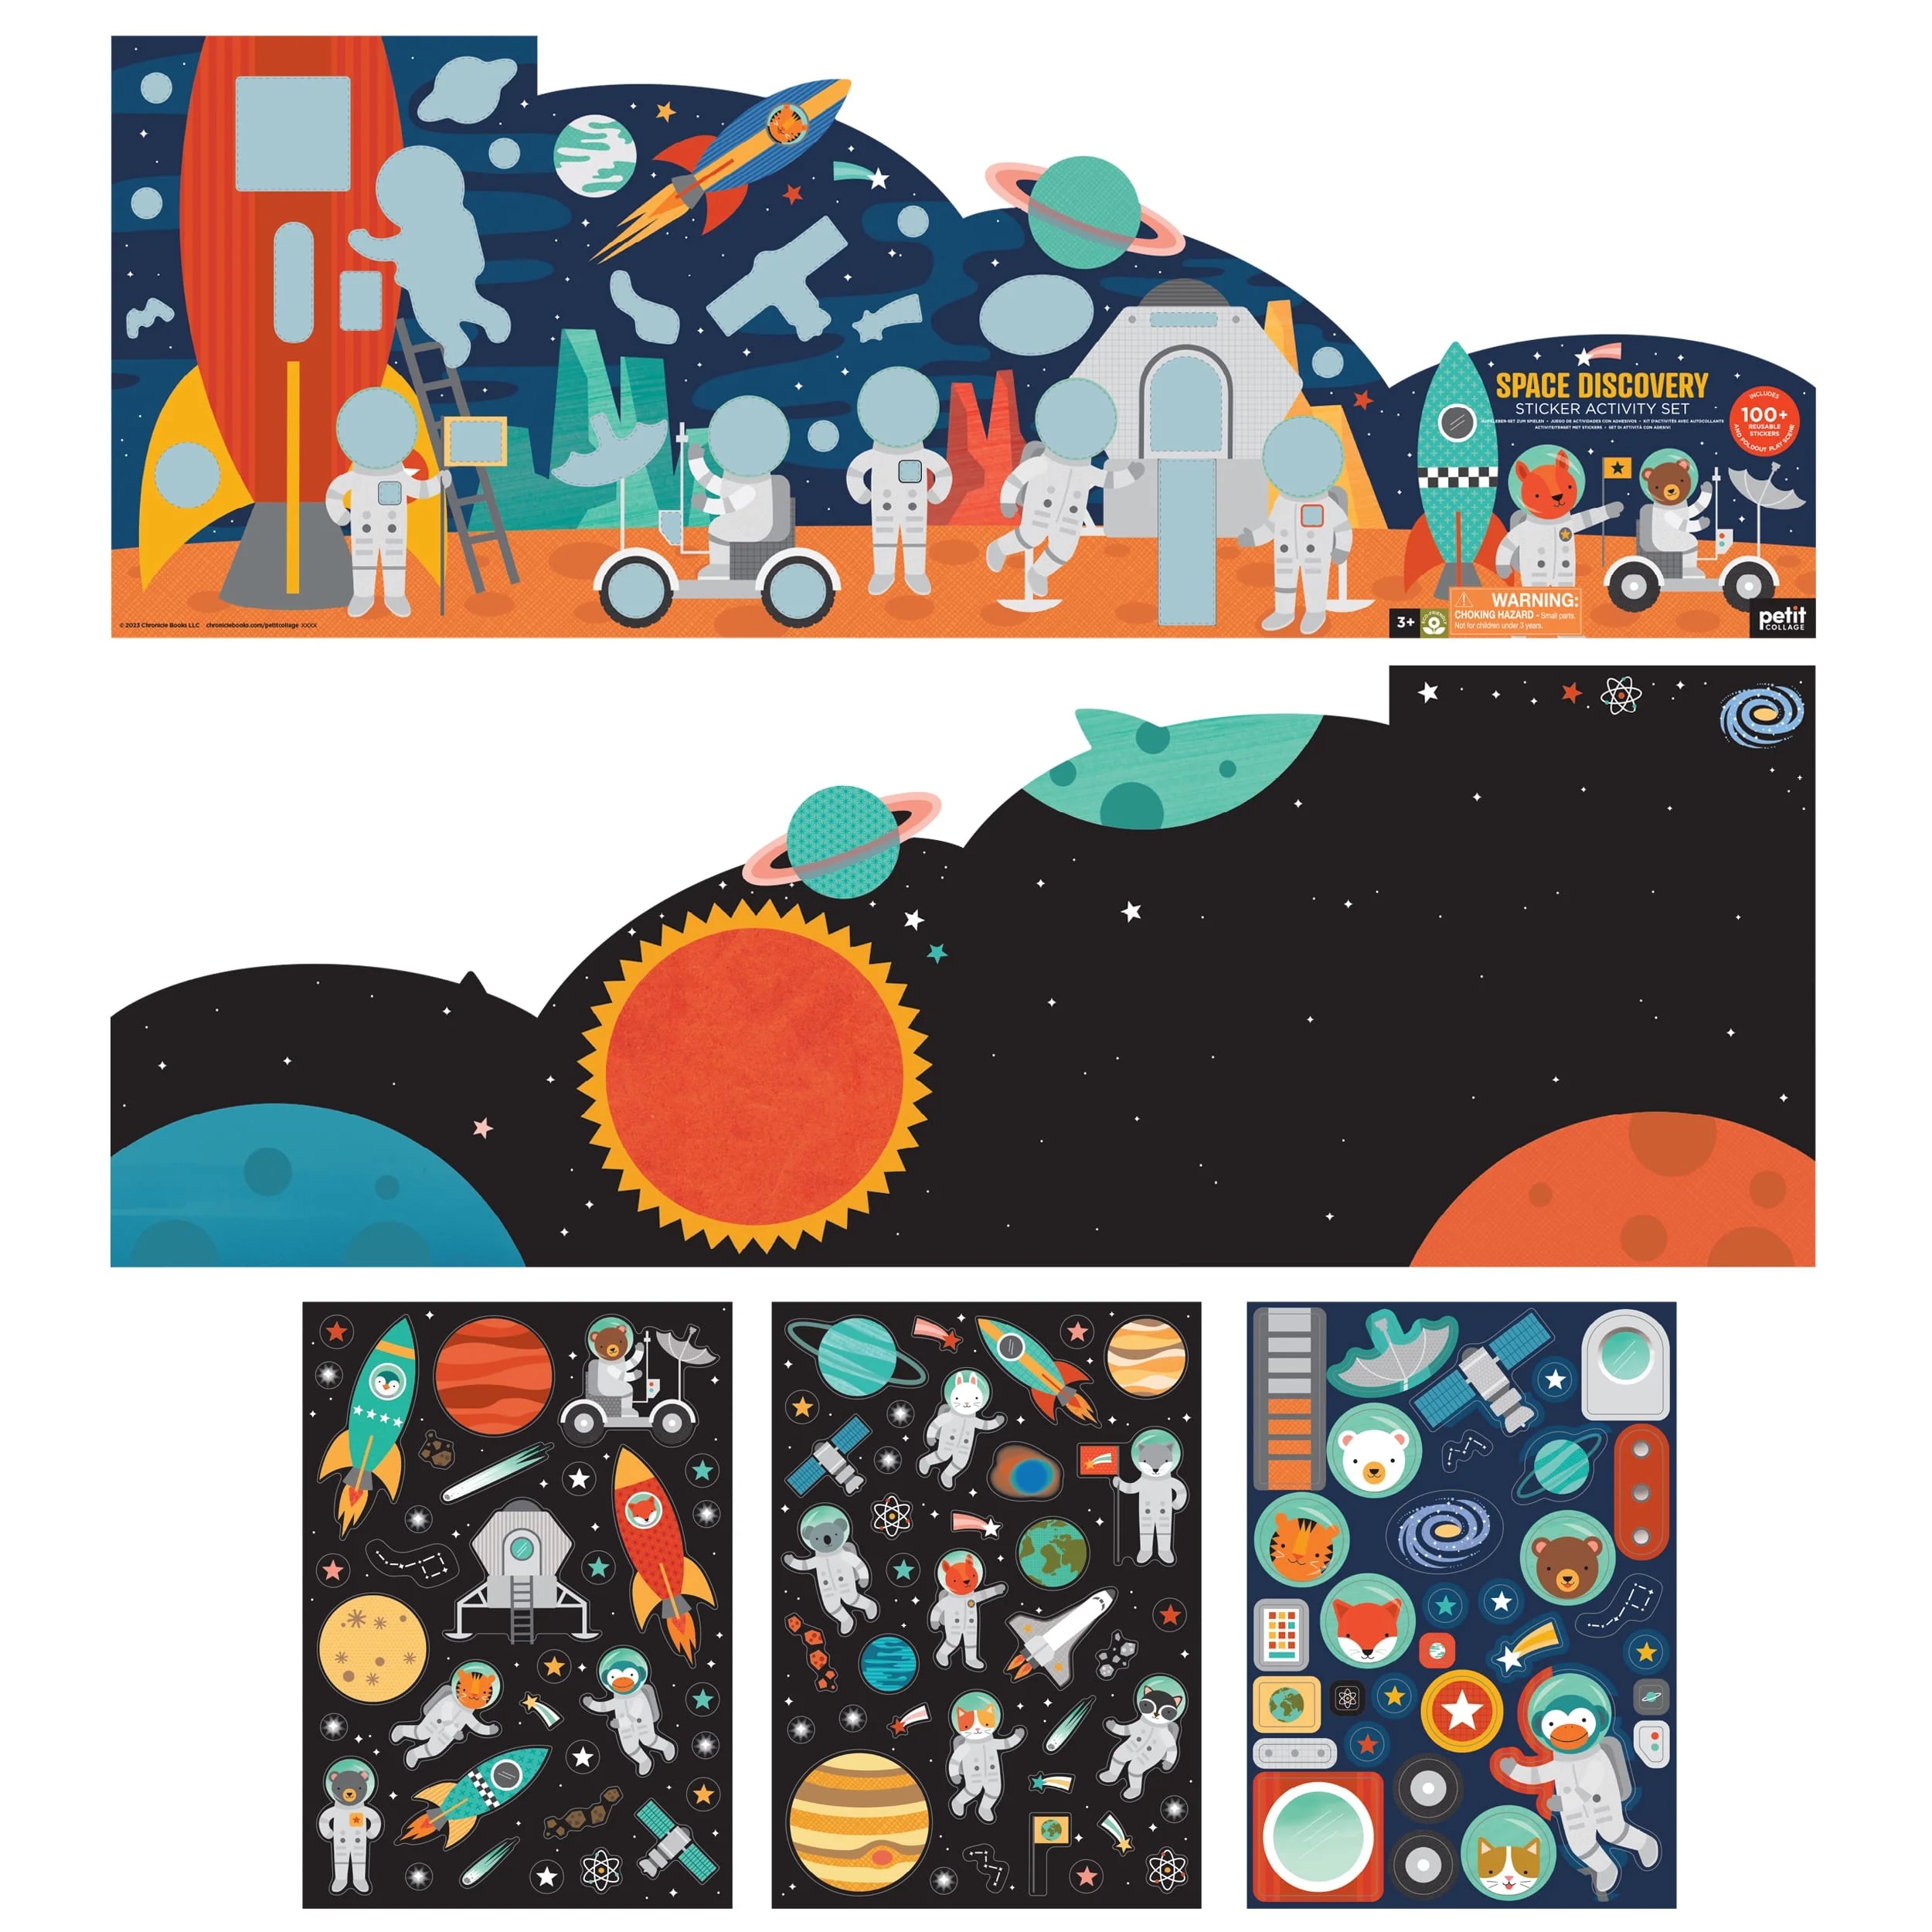 Space Discovery Sticker Activity Set 2